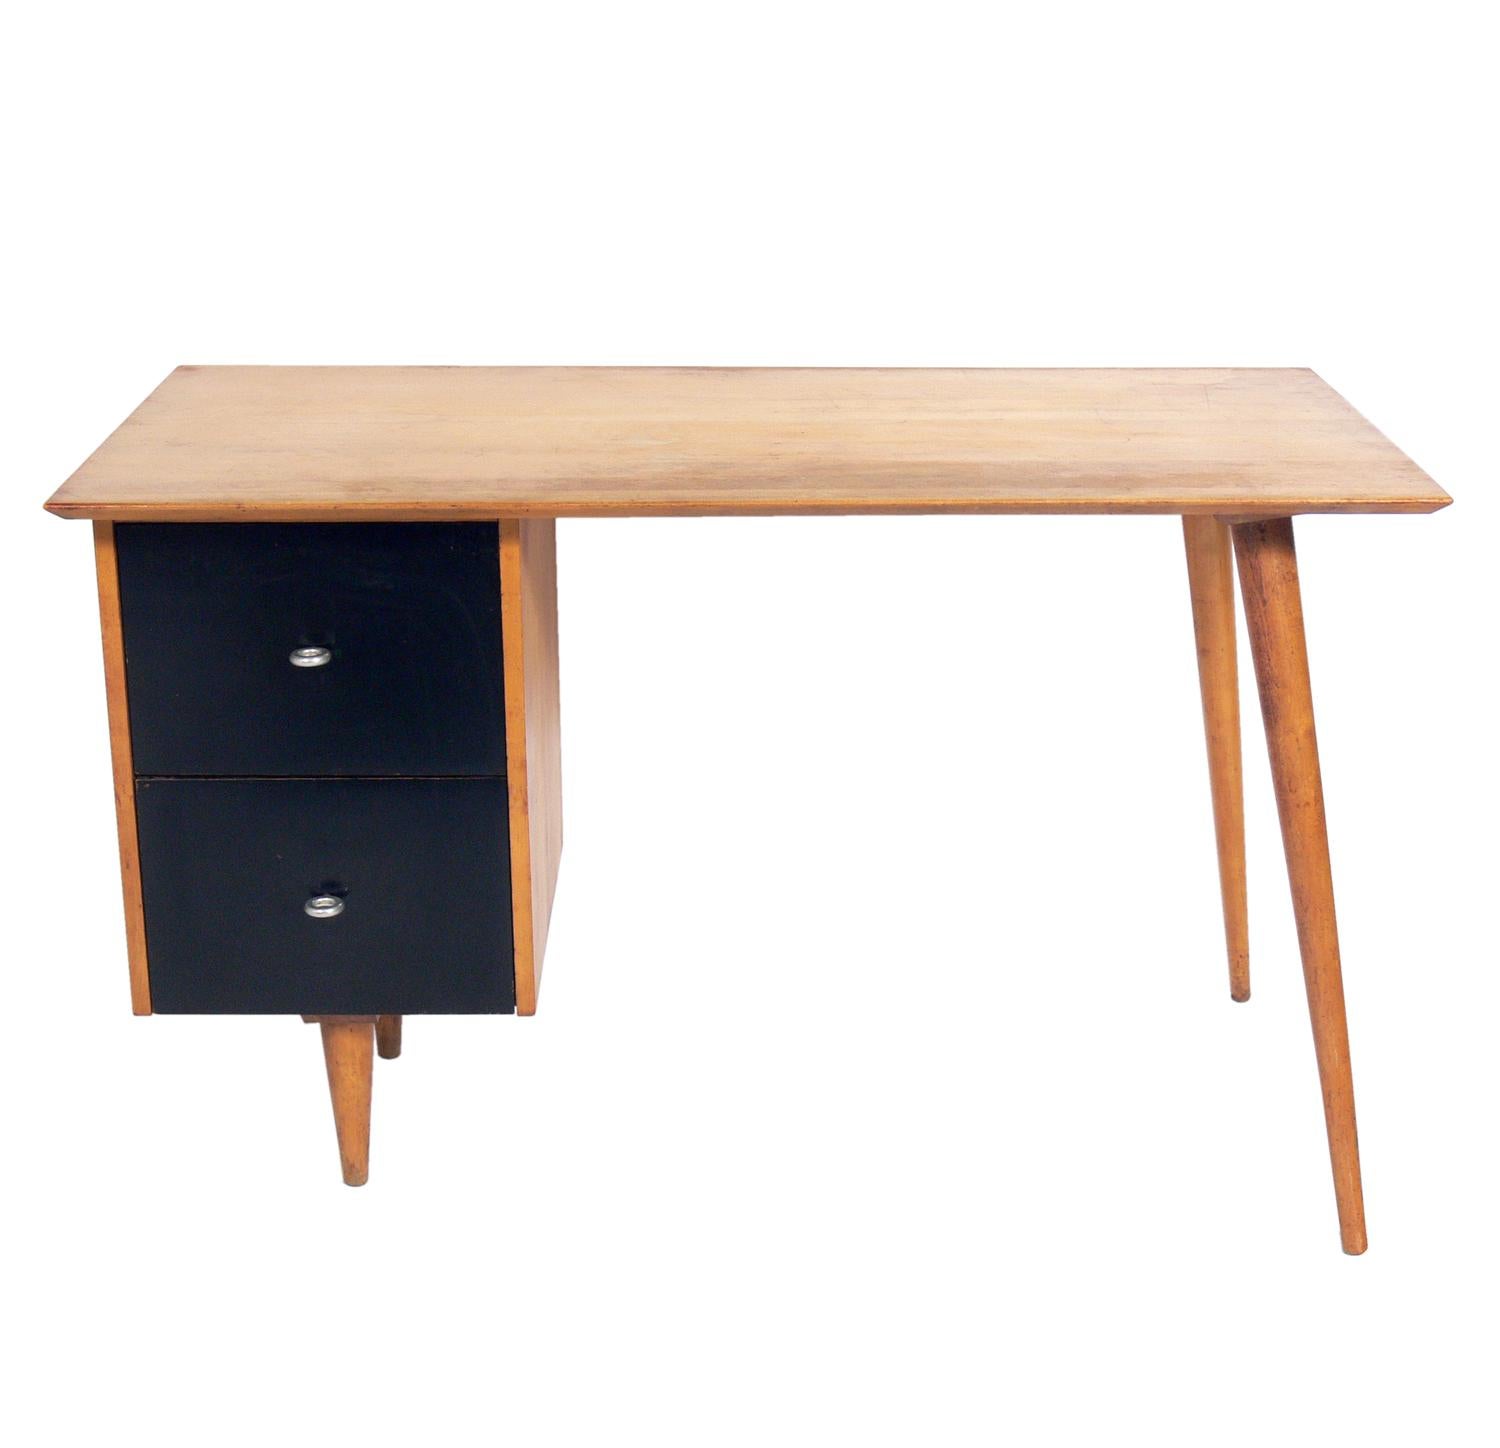 Mid-Century Modern desk and chair, designed by Paul McCobb for Planner Group, American, circa 1950s. This desk and chair are currently being refinished and can be completed in your choice of color. They can be refinished in a solid color, such as